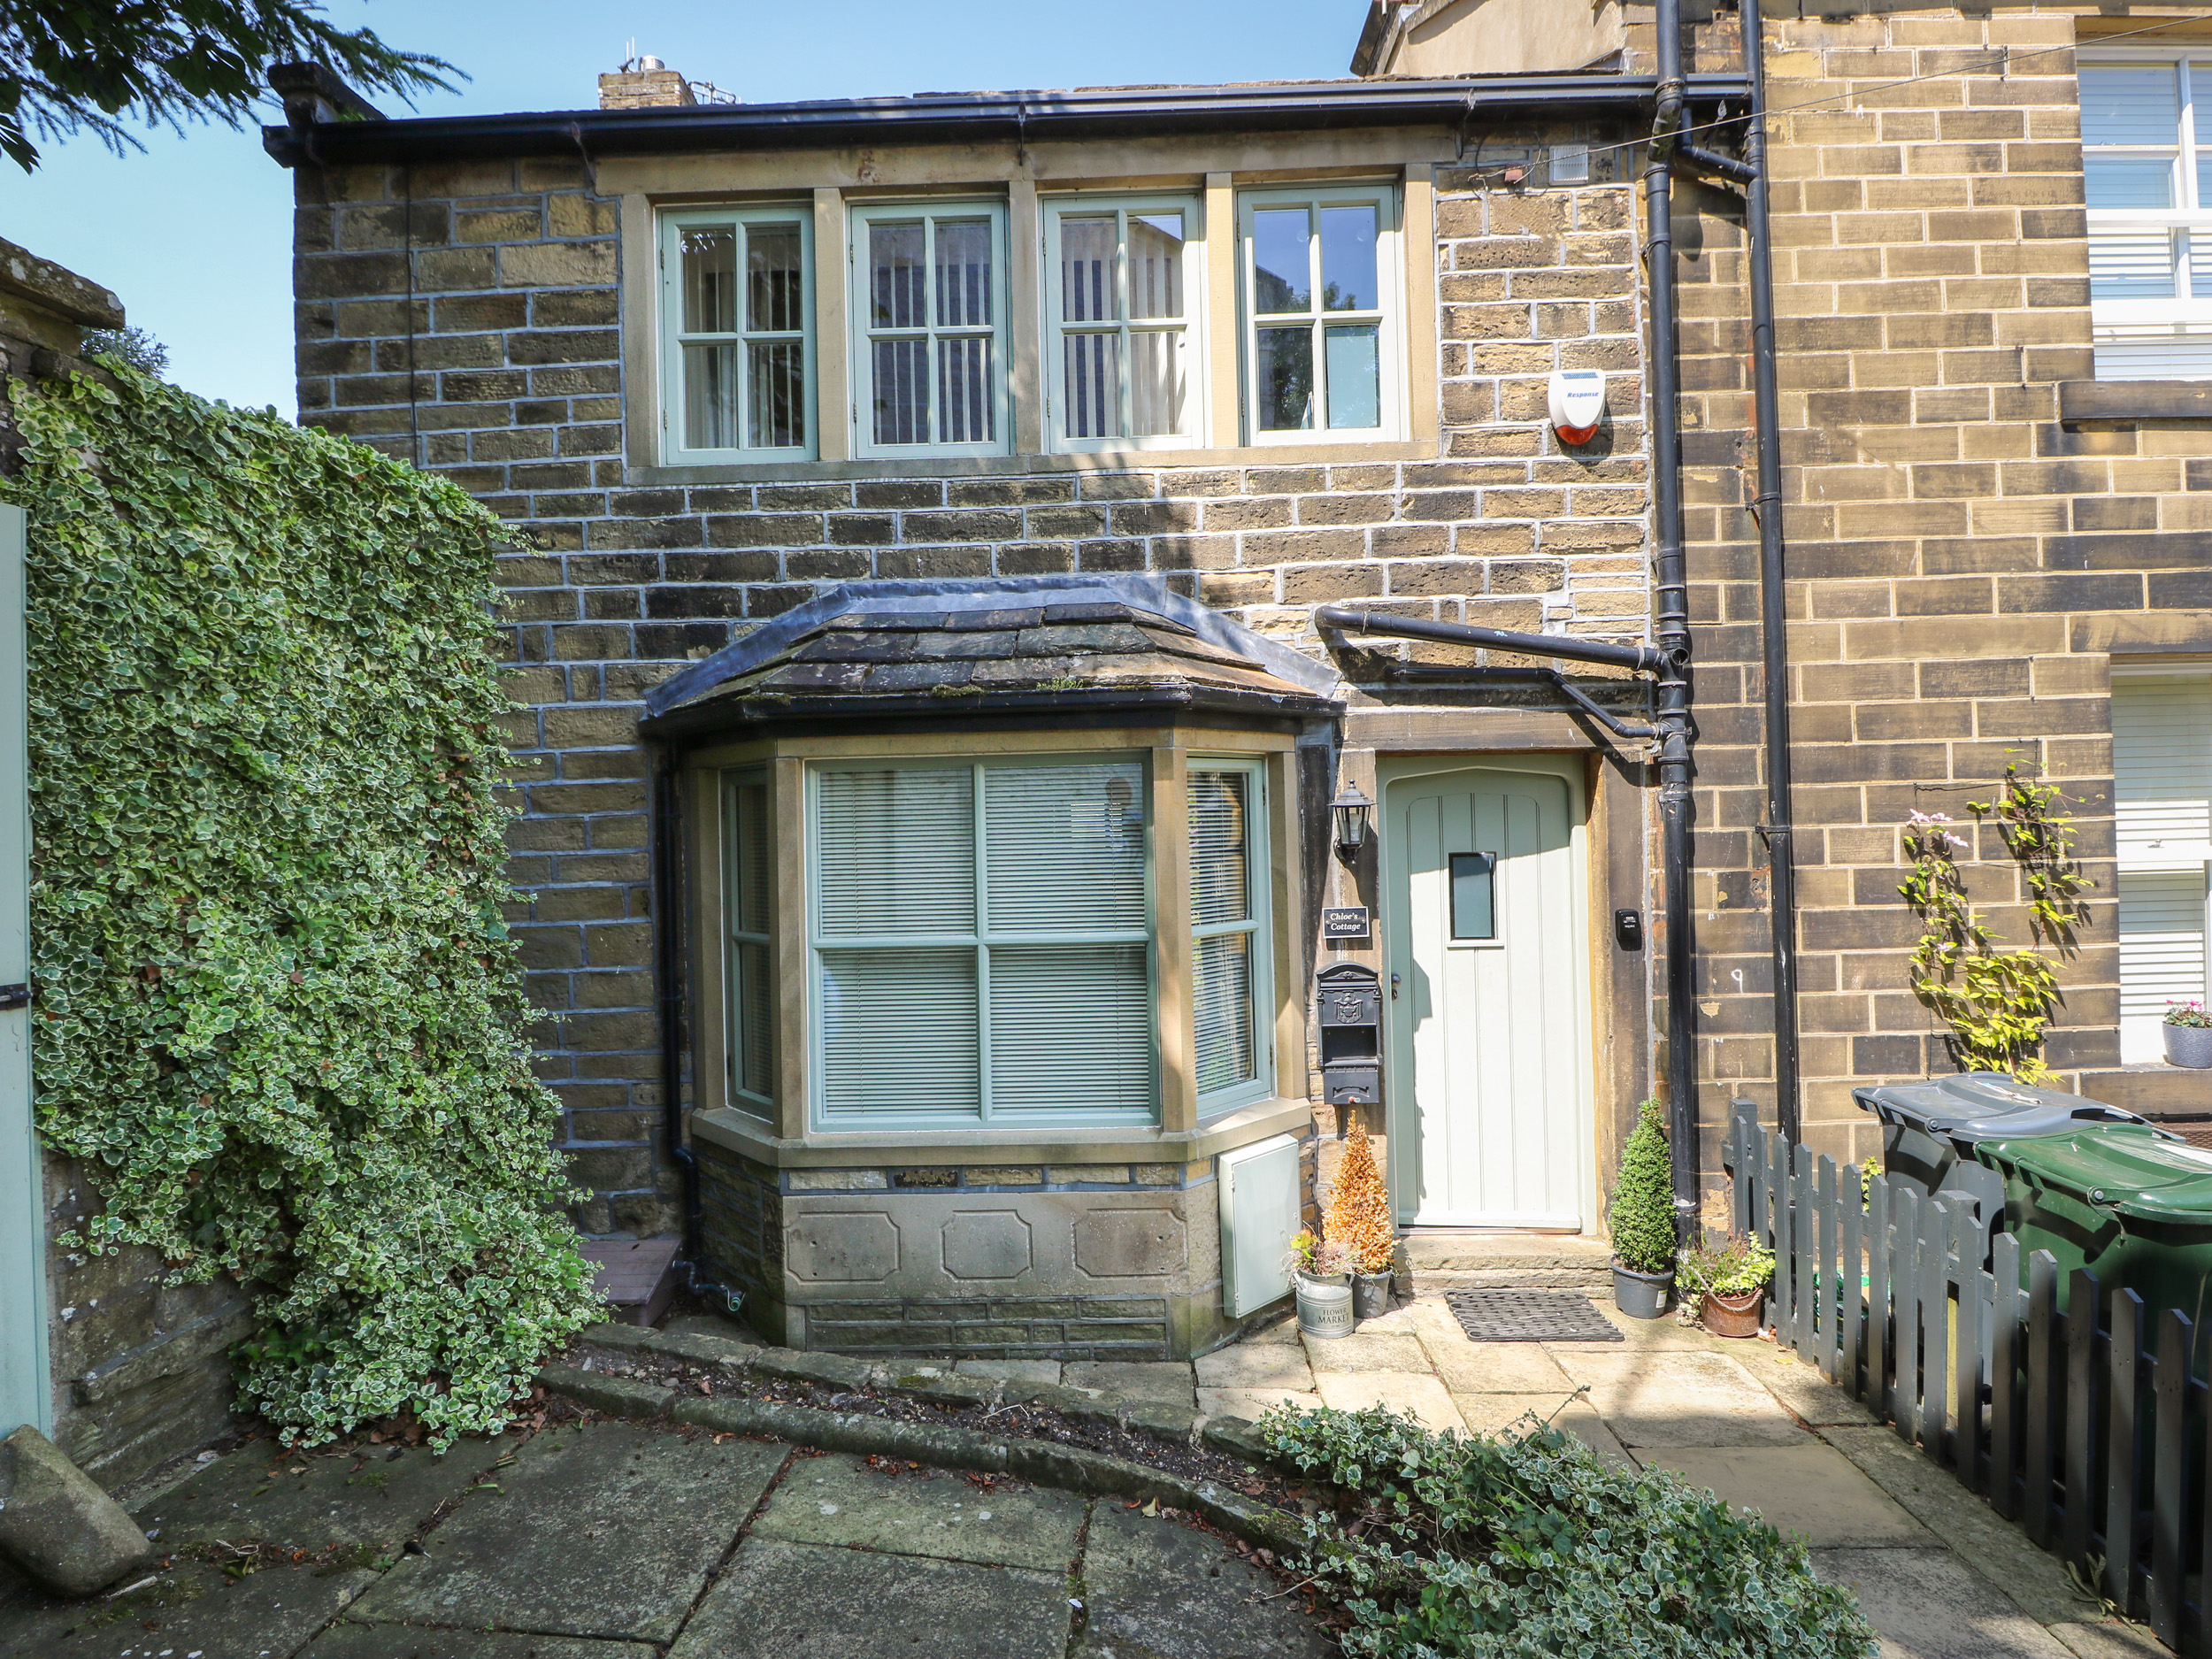 3 bedroom Cottage for rent in Haworth